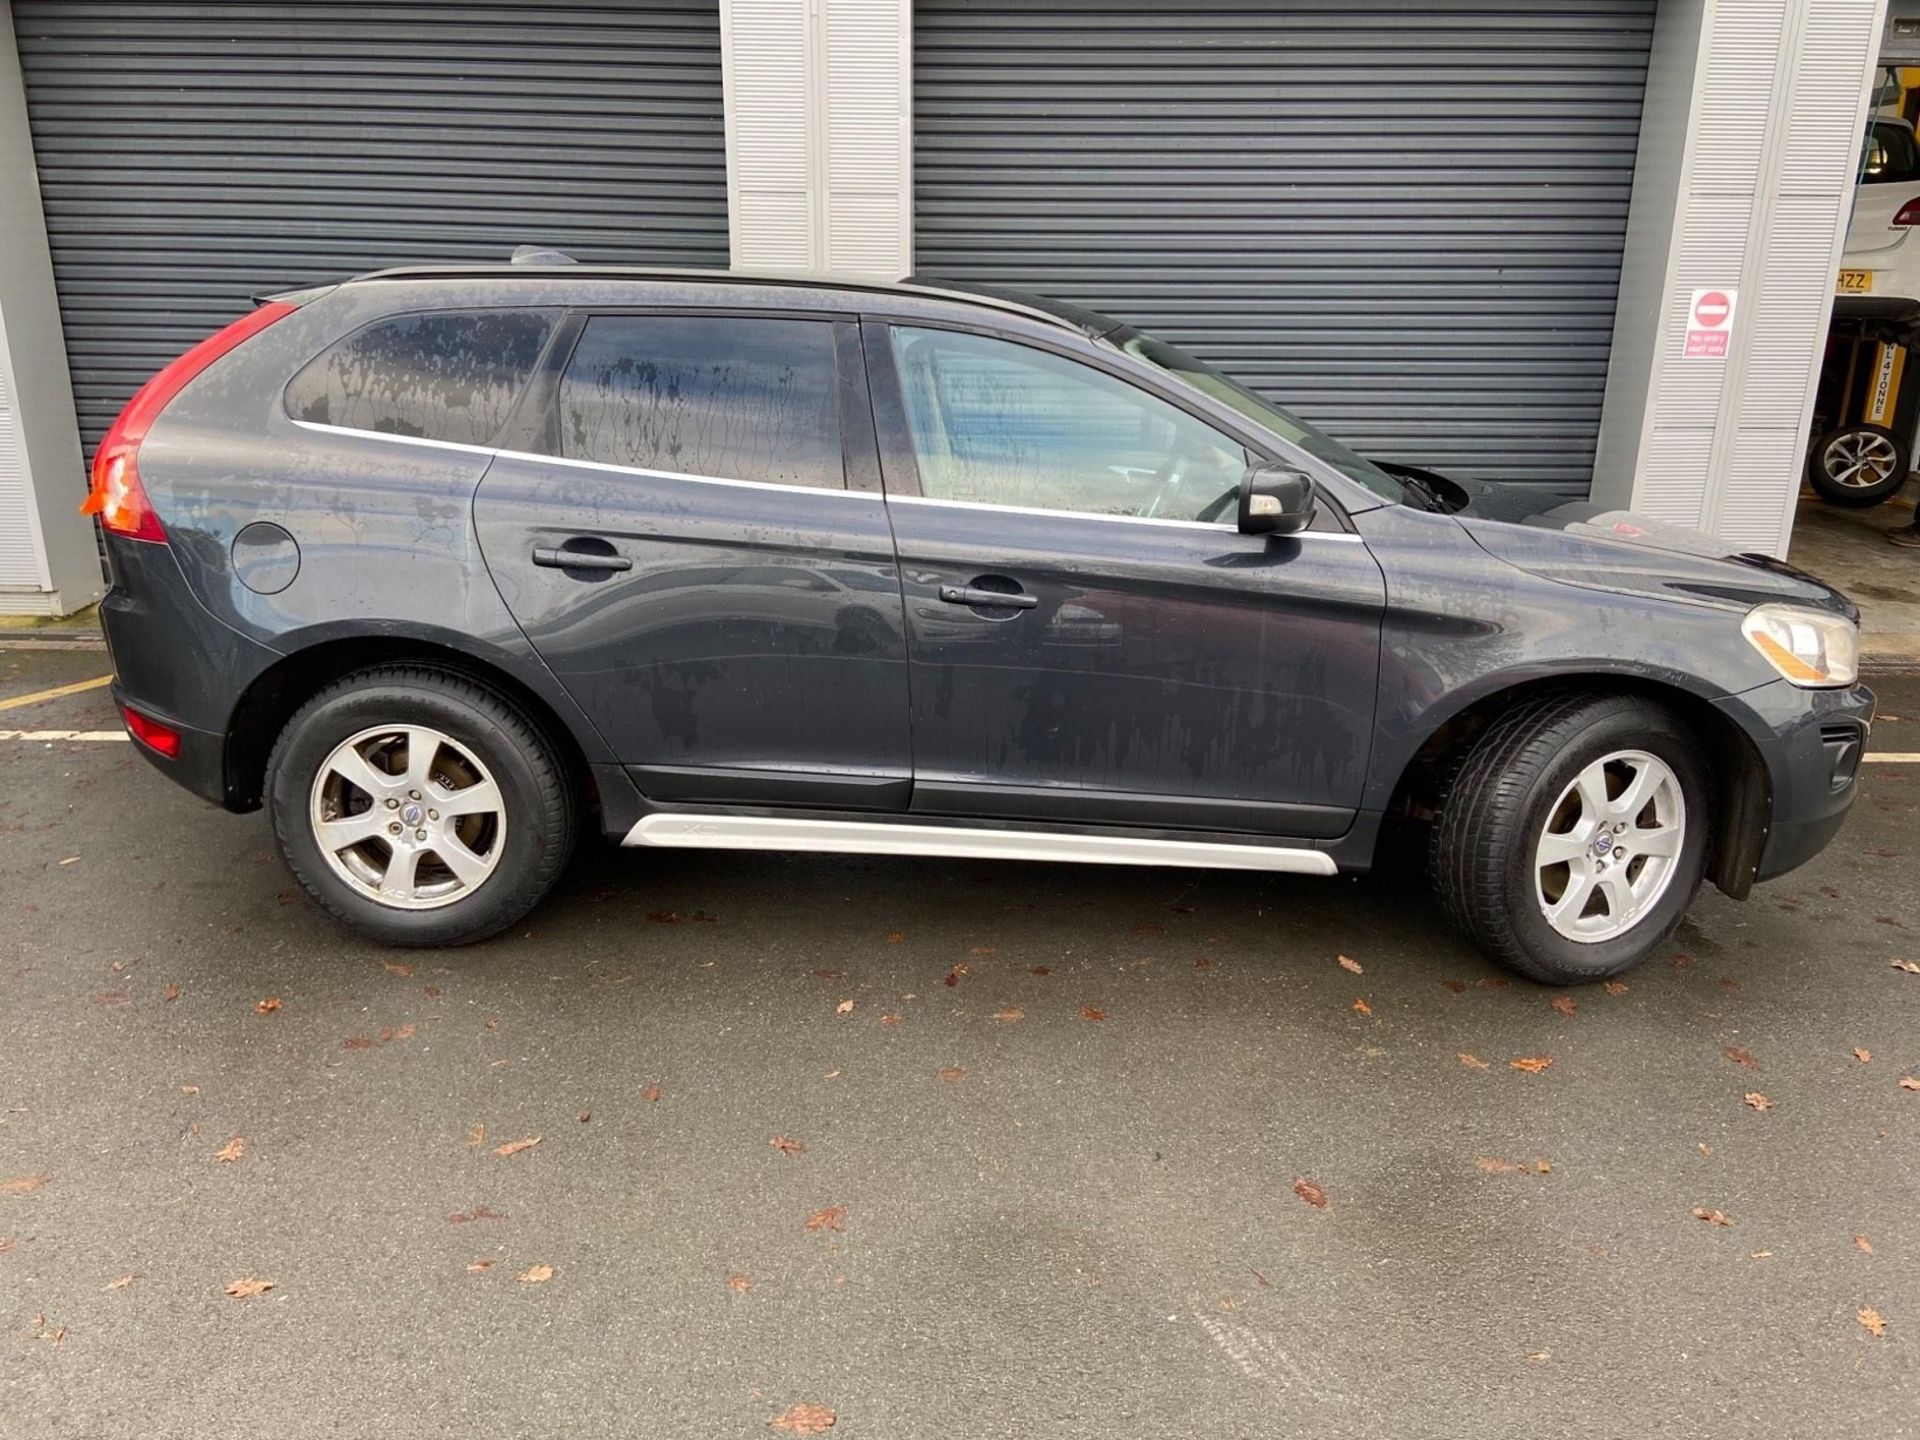 2009 Volvo XC60 2.4 D5 SE SUV 5dr 4x4 - CL505 - NO VAT ON THE HAMMER - Locatio - Image 3 of 17